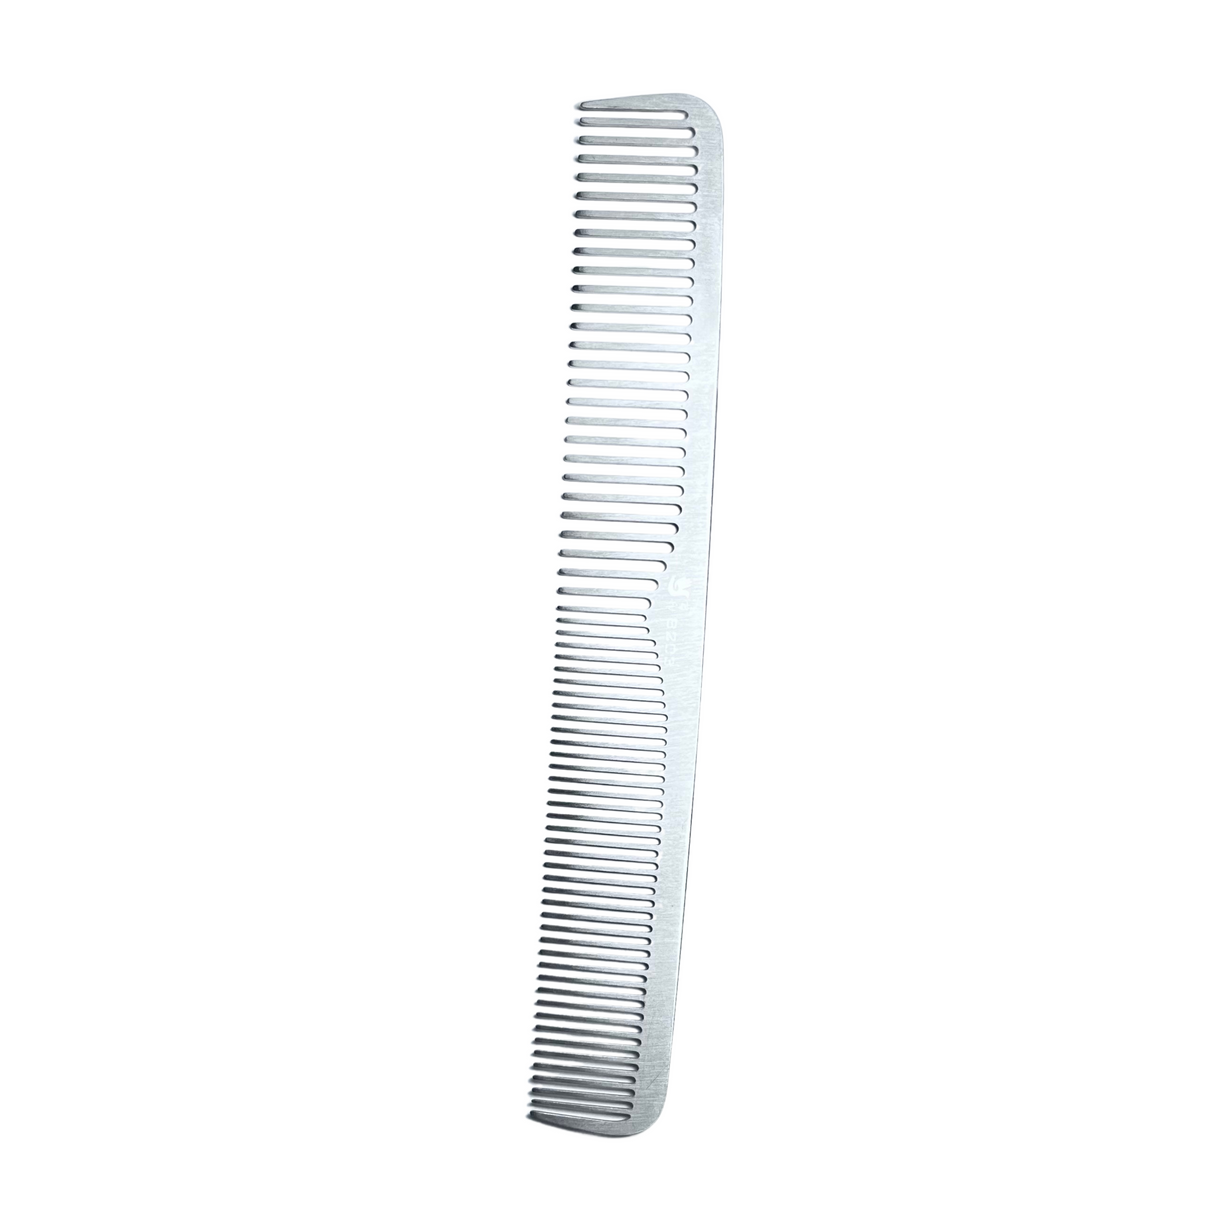 Stainless Steal Comb - Classic